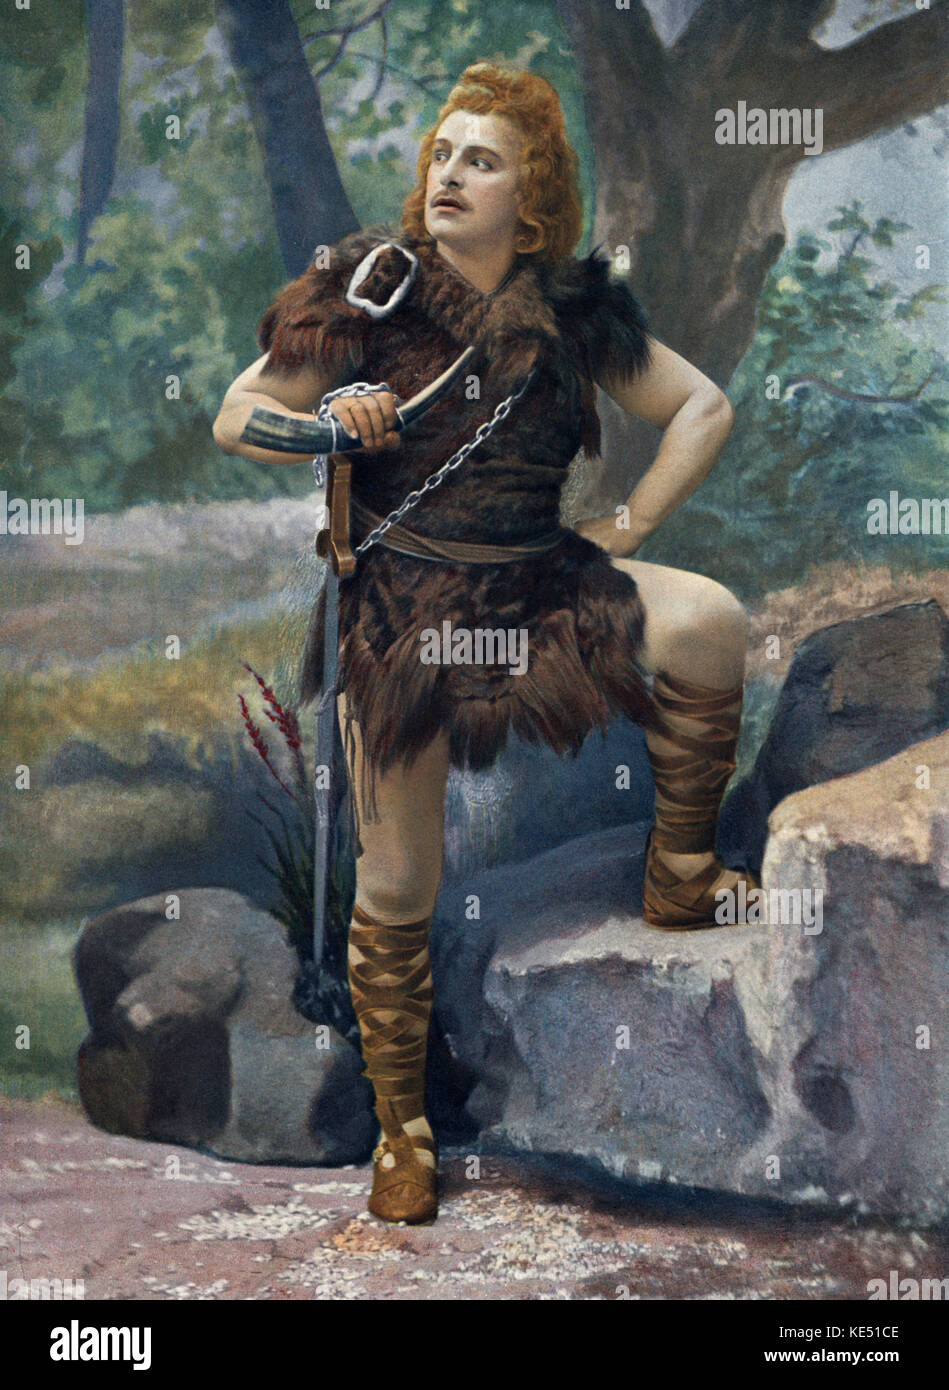 Jean de Reszke in title role of Richard Wagner 's opera Siegfried Performed at the Académie Nationale de Musique, 1901. One of the 4 operas in Der Ring des Nibelungen (The Ring Cycle). RW: German composer,  22 May 1813 – 13 February 1883 JR: Polish tenor, 14 January 1850 - 3 April 1925 Stock Photo